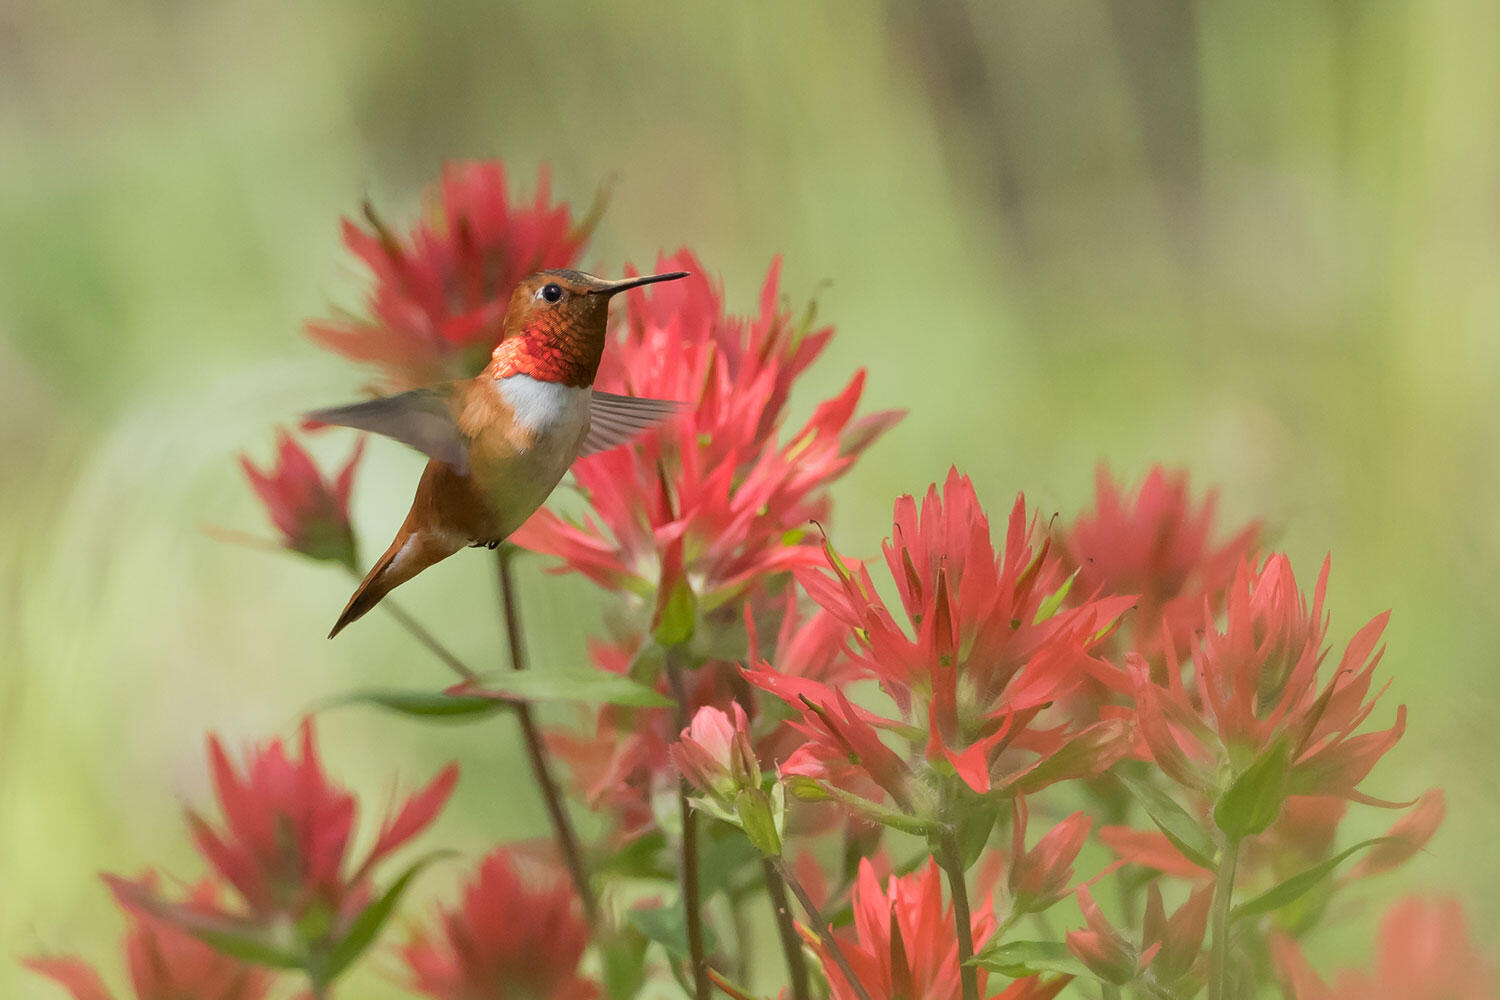 A Rufous Hummingbird hovers near Indian paintbrush flowers.